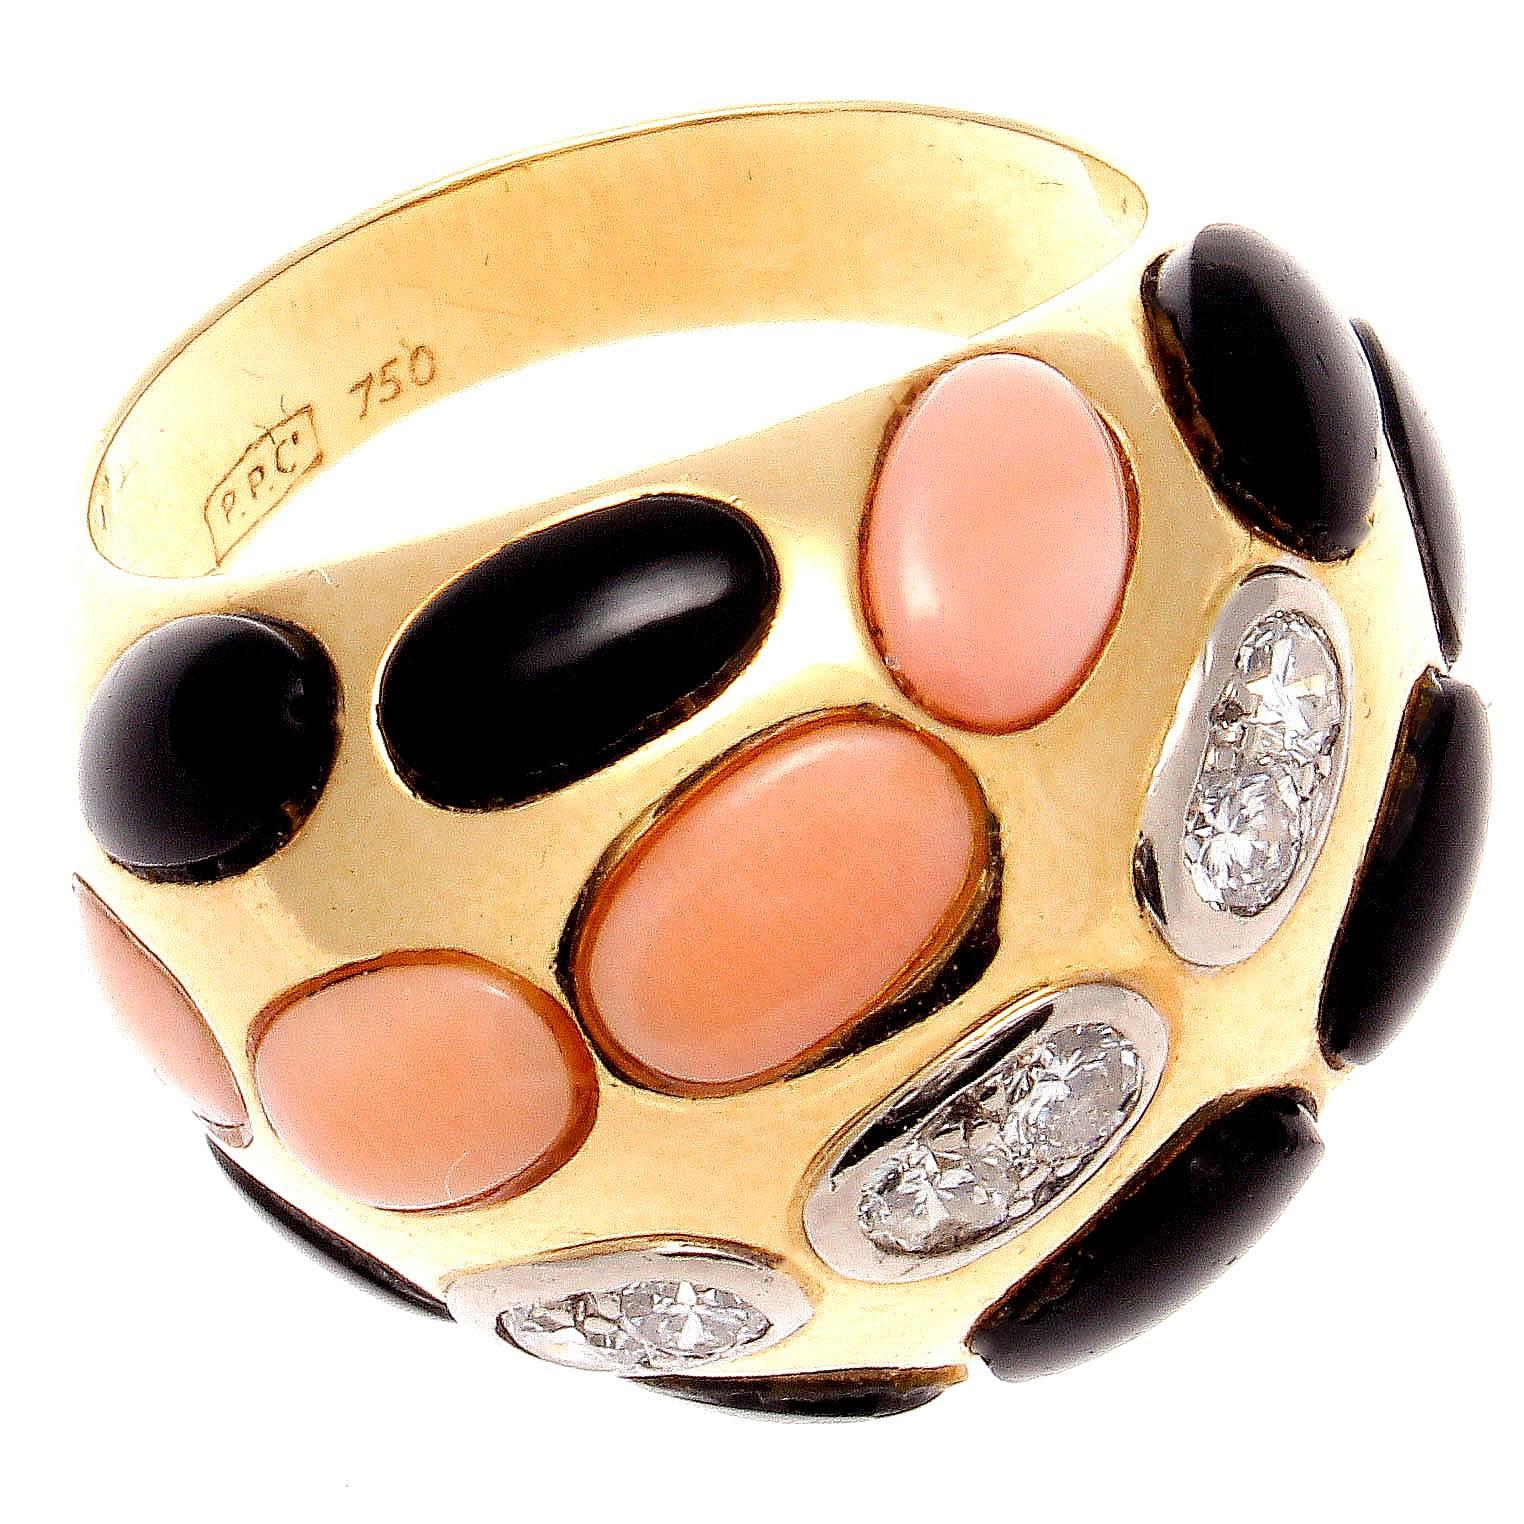 A colorful creation of abstract design. Featuring cabochon cut angel skin coral mixed with cabochon cut jet black onyx and near colorless diamonds. Crafted in 18k yellow gold. Please contact us if you would like to buy the matching earrings.

Ring